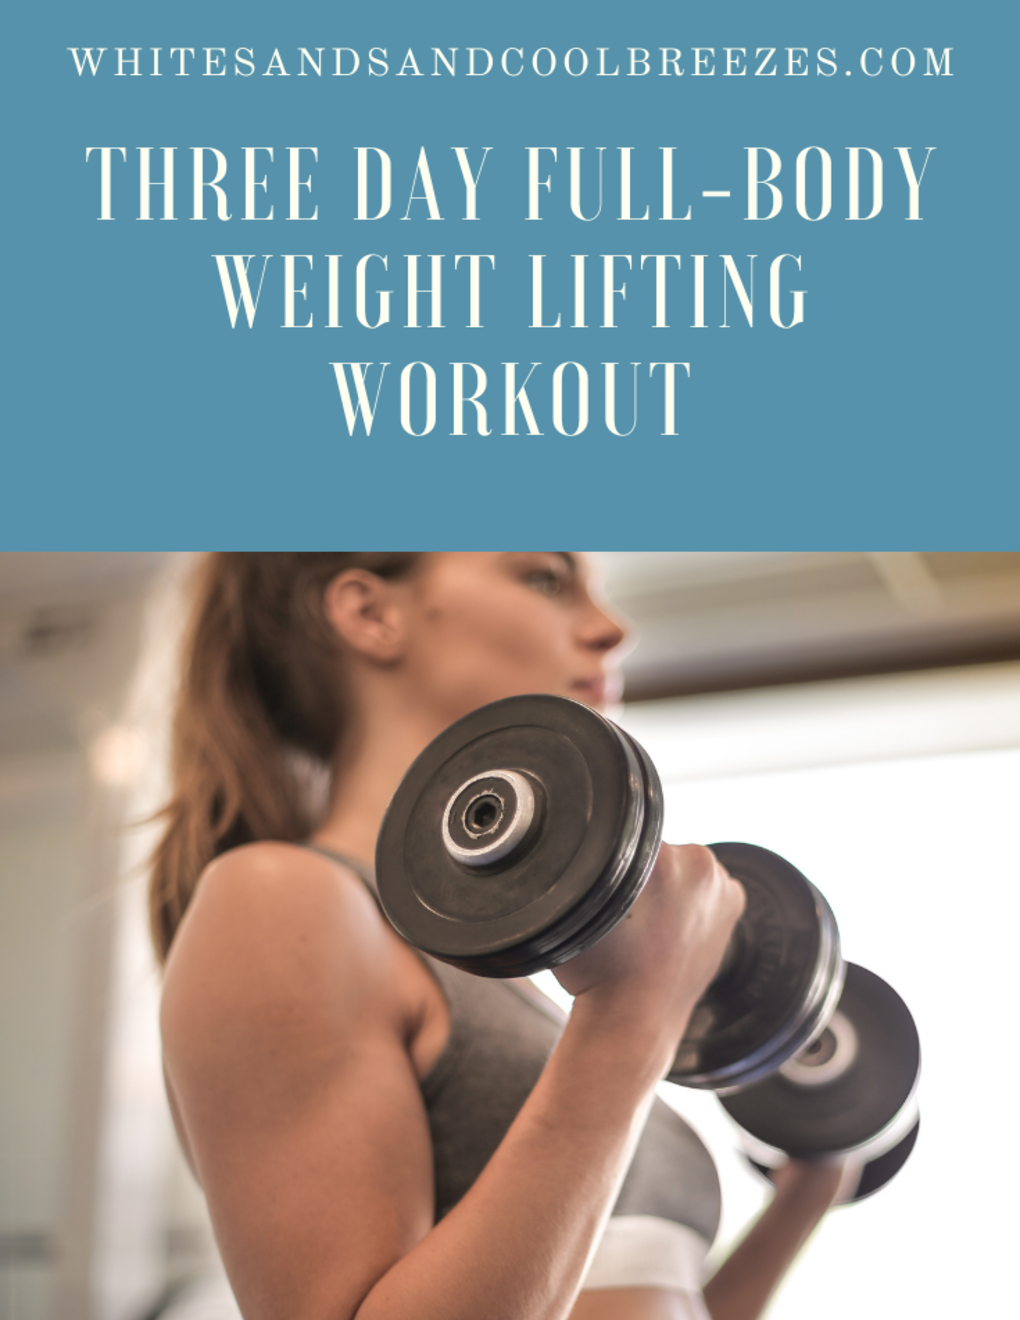 Three Day Full-Body Weight Lifting Workout